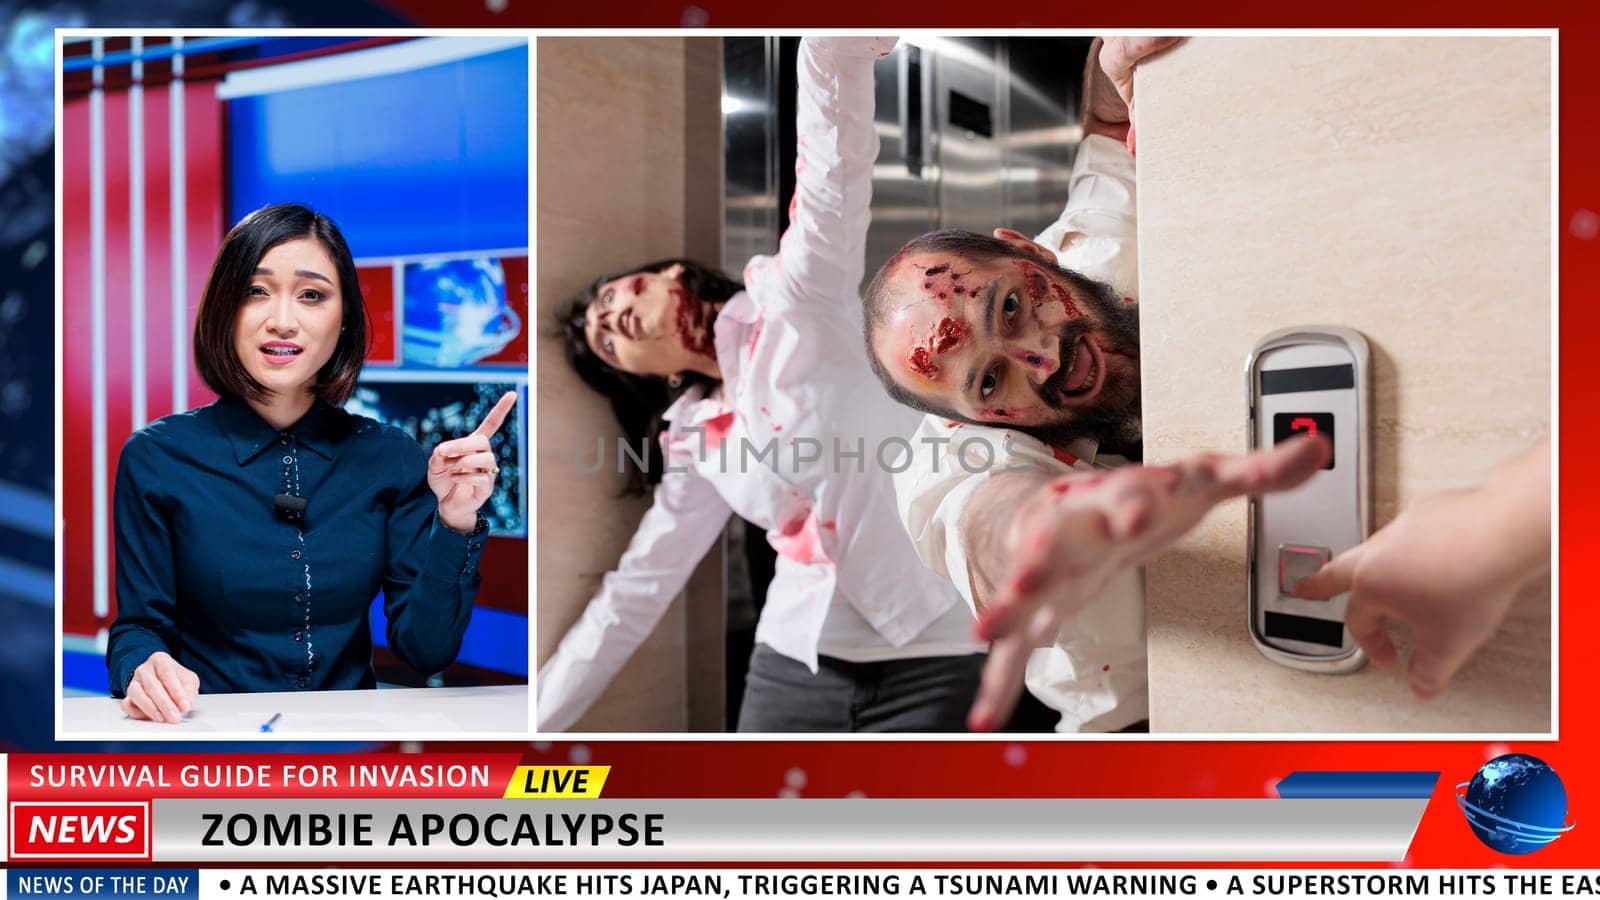 Newscast about zombie attack in town. Media journalist addressing scary dangerous virus spreading around the population, infecting people and frightening the world. Breaking news.